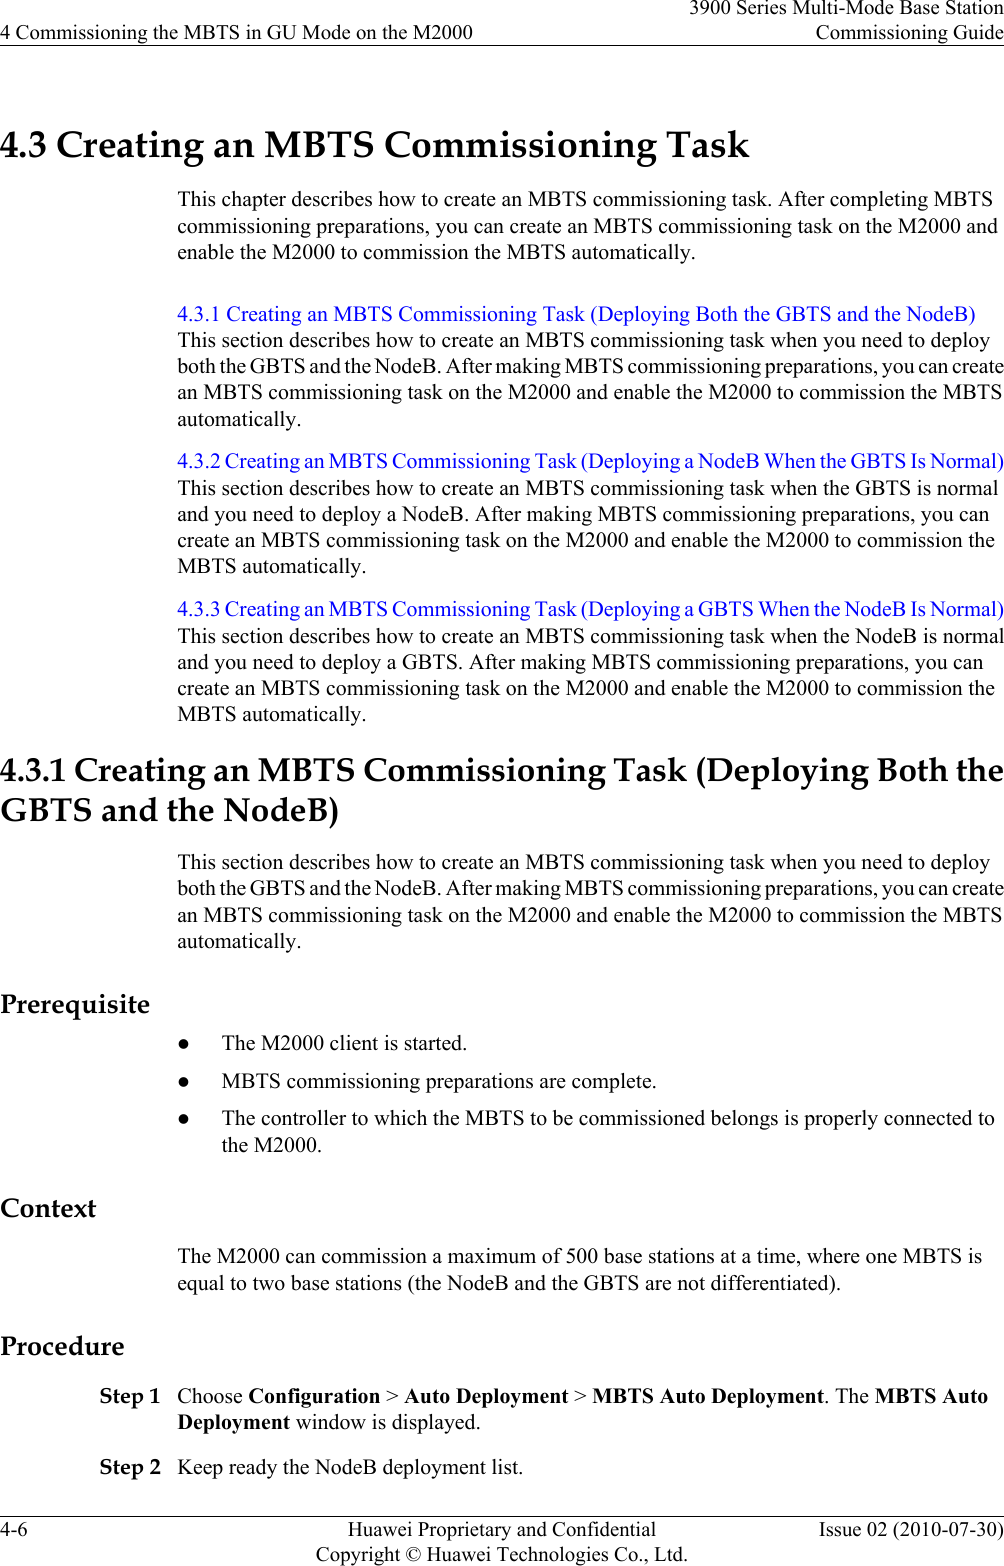 4.3 Creating an MBTS Commissioning TaskThis chapter describes how to create an MBTS commissioning task. After completing MBTScommissioning preparations, you can create an MBTS commissioning task on the M2000 andenable the M2000 to commission the MBTS automatically.4.3.1 Creating an MBTS Commissioning Task (Deploying Both the GBTS and the NodeB)This section describes how to create an MBTS commissioning task when you need to deployboth the GBTS and the NodeB. After making MBTS commissioning preparations, you can createan MBTS commissioning task on the M2000 and enable the M2000 to commission the MBTSautomatically.4.3.2 Creating an MBTS Commissioning Task (Deploying a NodeB When the GBTS Is Normal)This section describes how to create an MBTS commissioning task when the GBTS is normaland you need to deploy a NodeB. After making MBTS commissioning preparations, you cancreate an MBTS commissioning task on the M2000 and enable the M2000 to commission theMBTS automatically.4.3.3 Creating an MBTS Commissioning Task (Deploying a GBTS When the NodeB Is Normal)This section describes how to create an MBTS commissioning task when the NodeB is normaland you need to deploy a GBTS. After making MBTS commissioning preparations, you cancreate an MBTS commissioning task on the M2000 and enable the M2000 to commission theMBTS automatically.4.3.1 Creating an MBTS Commissioning Task (Deploying Both theGBTS and the NodeB)This section describes how to create an MBTS commissioning task when you need to deployboth the GBTS and the NodeB. After making MBTS commissioning preparations, you can createan MBTS commissioning task on the M2000 and enable the M2000 to commission the MBTSautomatically.PrerequisitelThe M2000 client is started.lMBTS commissioning preparations are complete.lThe controller to which the MBTS to be commissioned belongs is properly connected tothe M2000.ContextThe M2000 can commission a maximum of 500 base stations at a time, where one MBTS isequal to two base stations (the NodeB and the GBTS are not differentiated).ProcedureStep 1 Choose Configuration &gt; Auto Deployment &gt; MBTS Auto Deployment. The MBTS AutoDeployment window is displayed.Step 2 Keep ready the NodeB deployment list.4 Commissioning the MBTS in GU Mode on the M20003900 Series Multi-Mode Base StationCommissioning Guide4-6 Huawei Proprietary and ConfidentialCopyright © Huawei Technologies Co., Ltd.Issue 02 (2010-07-30)